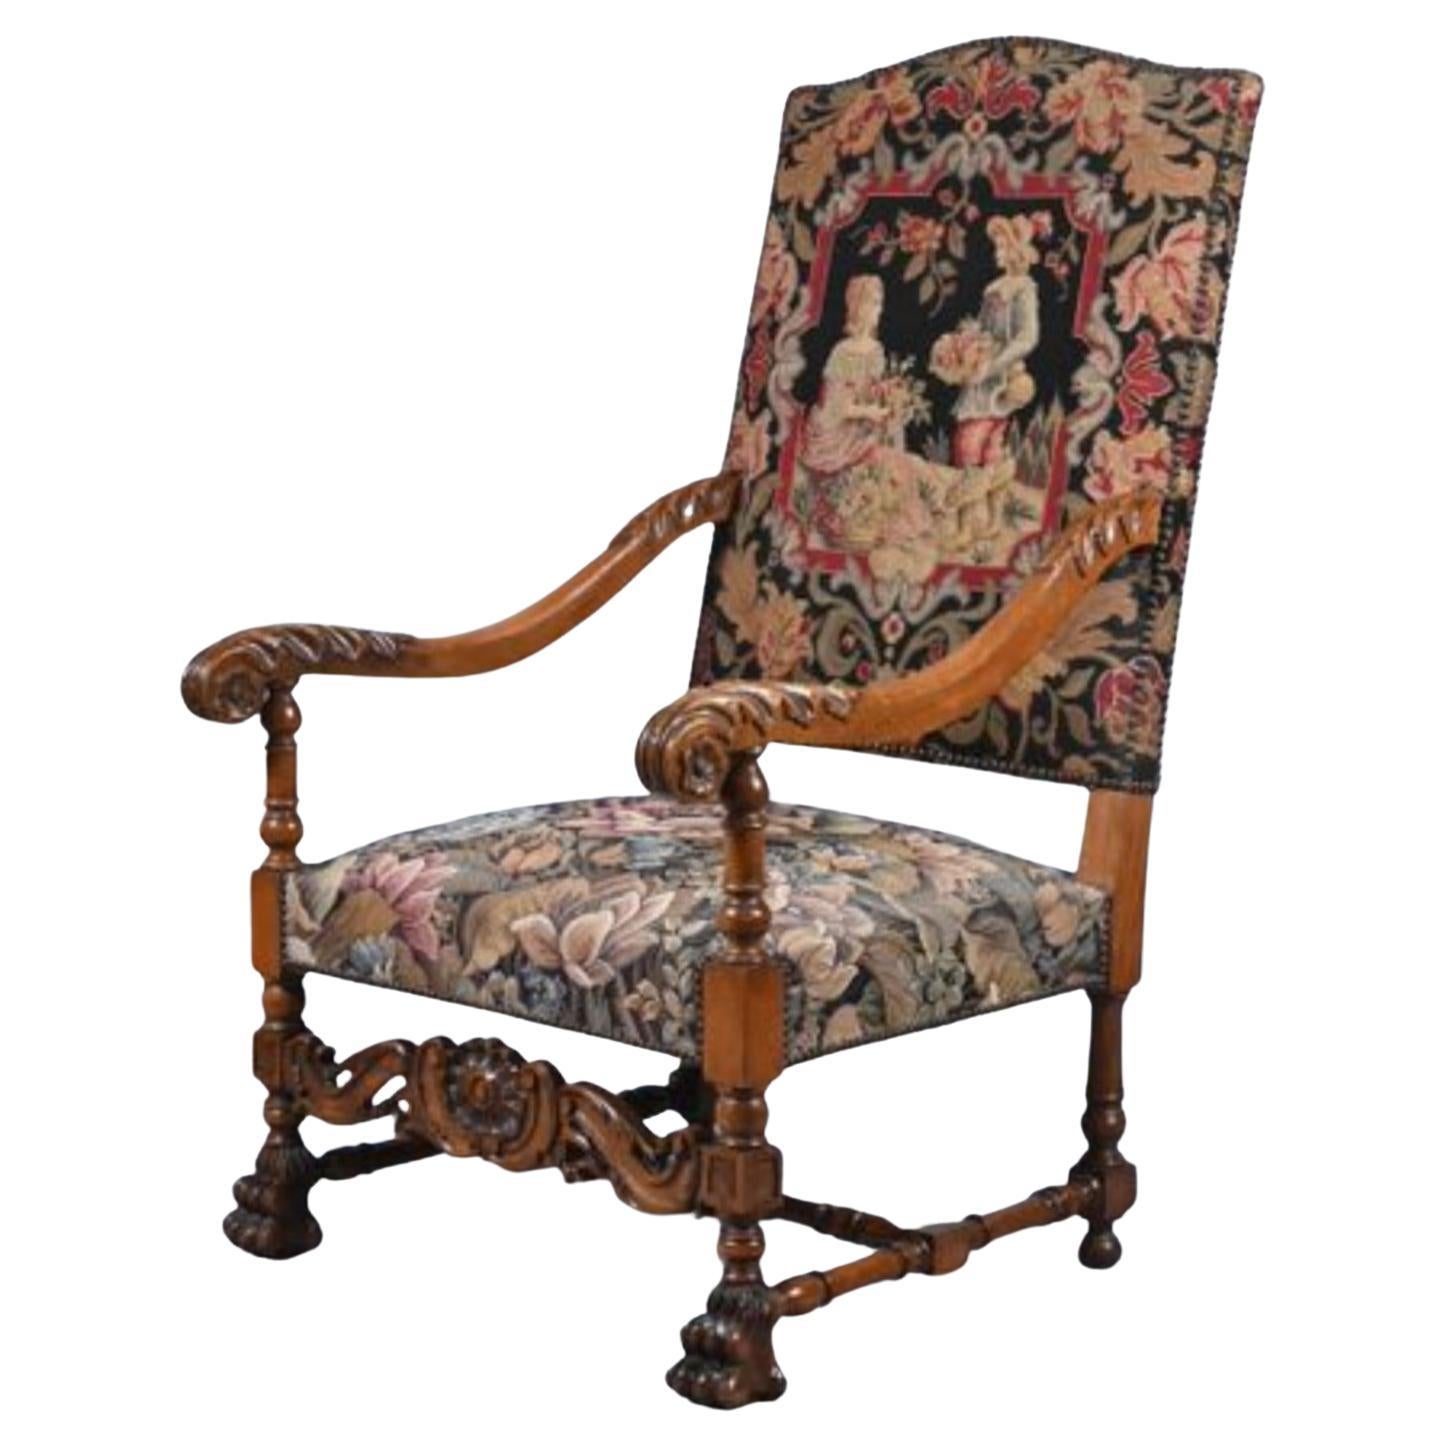 Rare Portuguese Chair 19th Century Rosewood